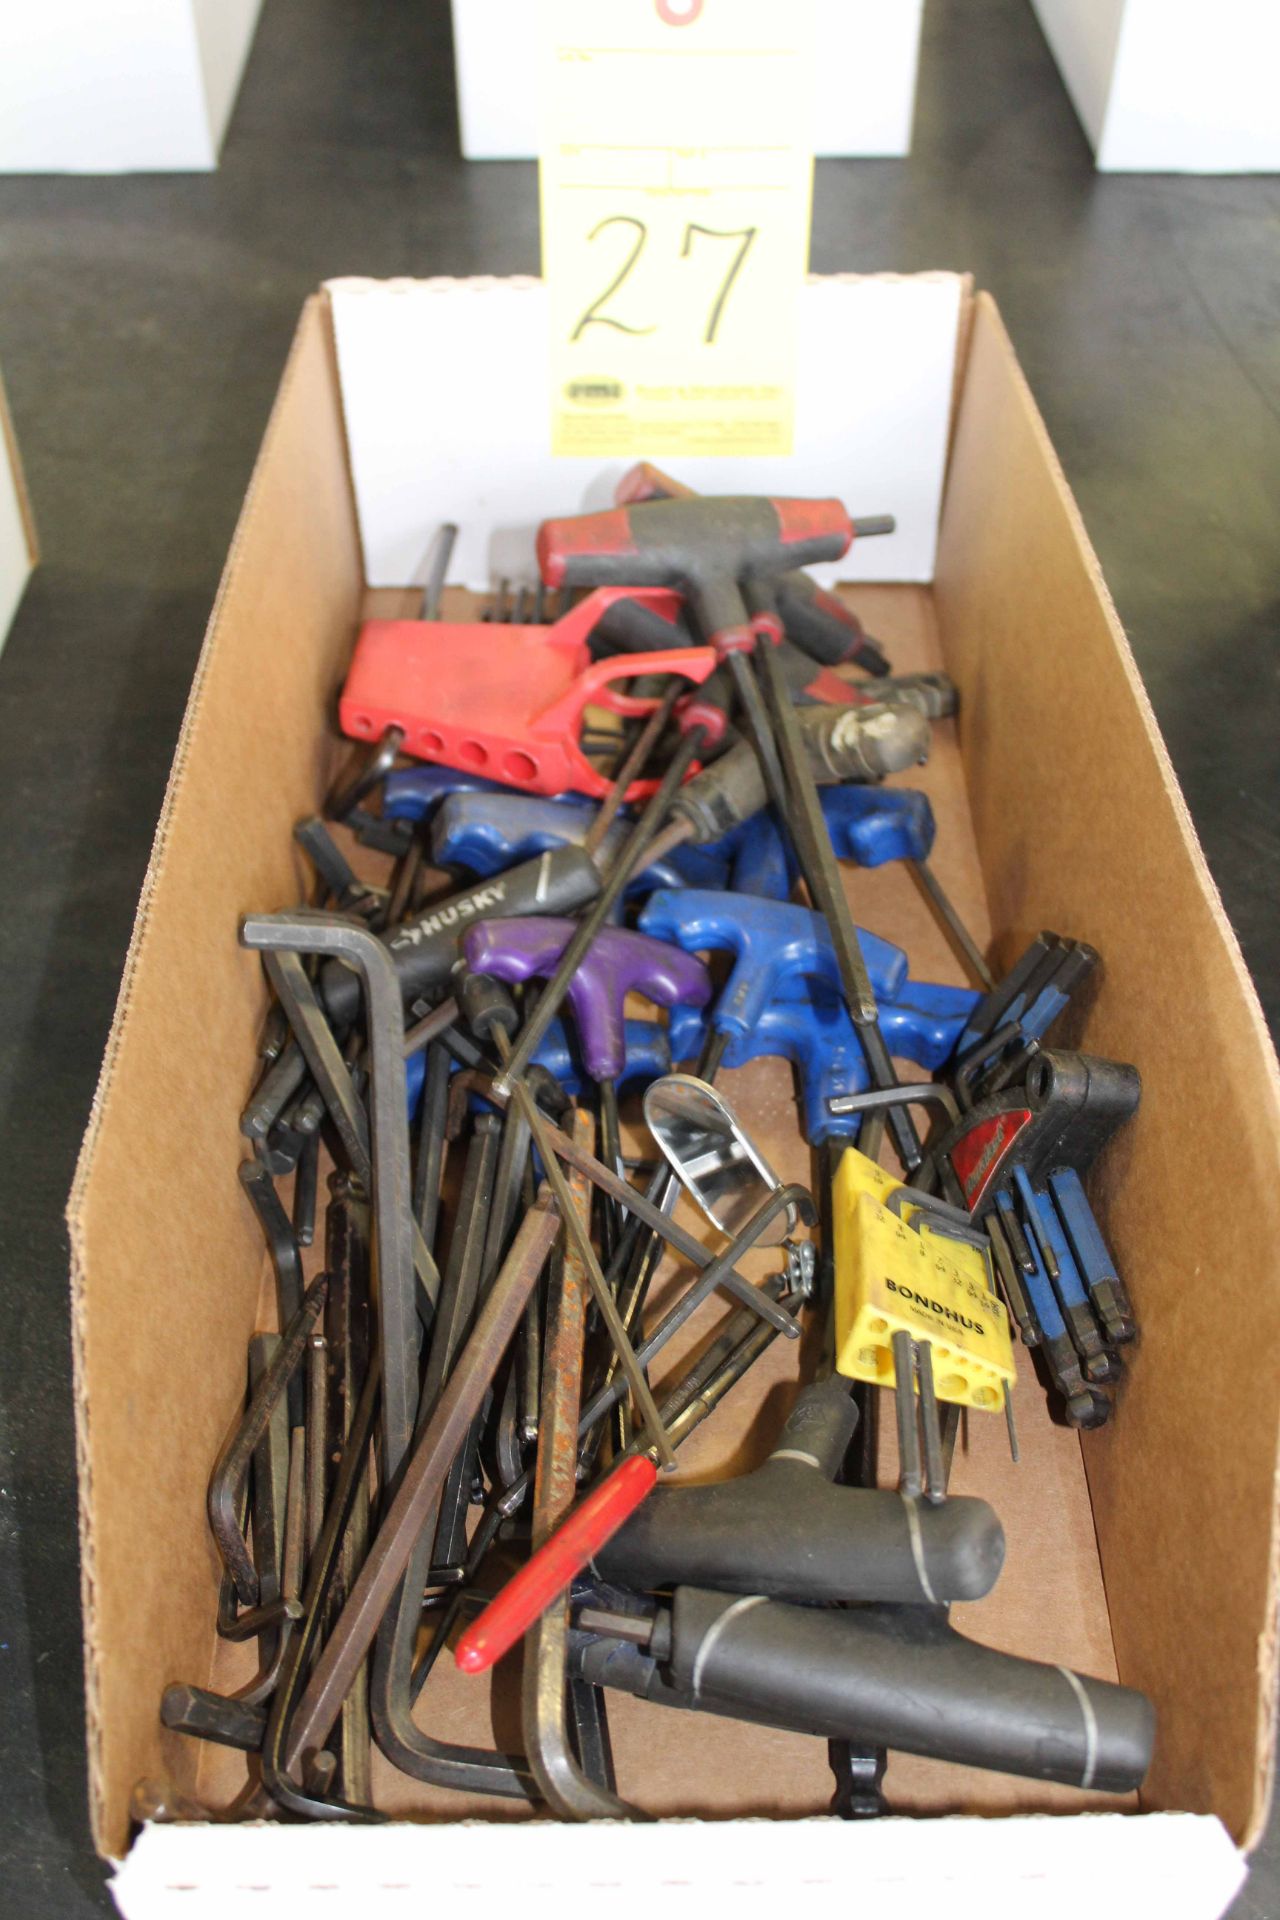 LOT OF ALLEN WRENCHES, assorted (in one box)